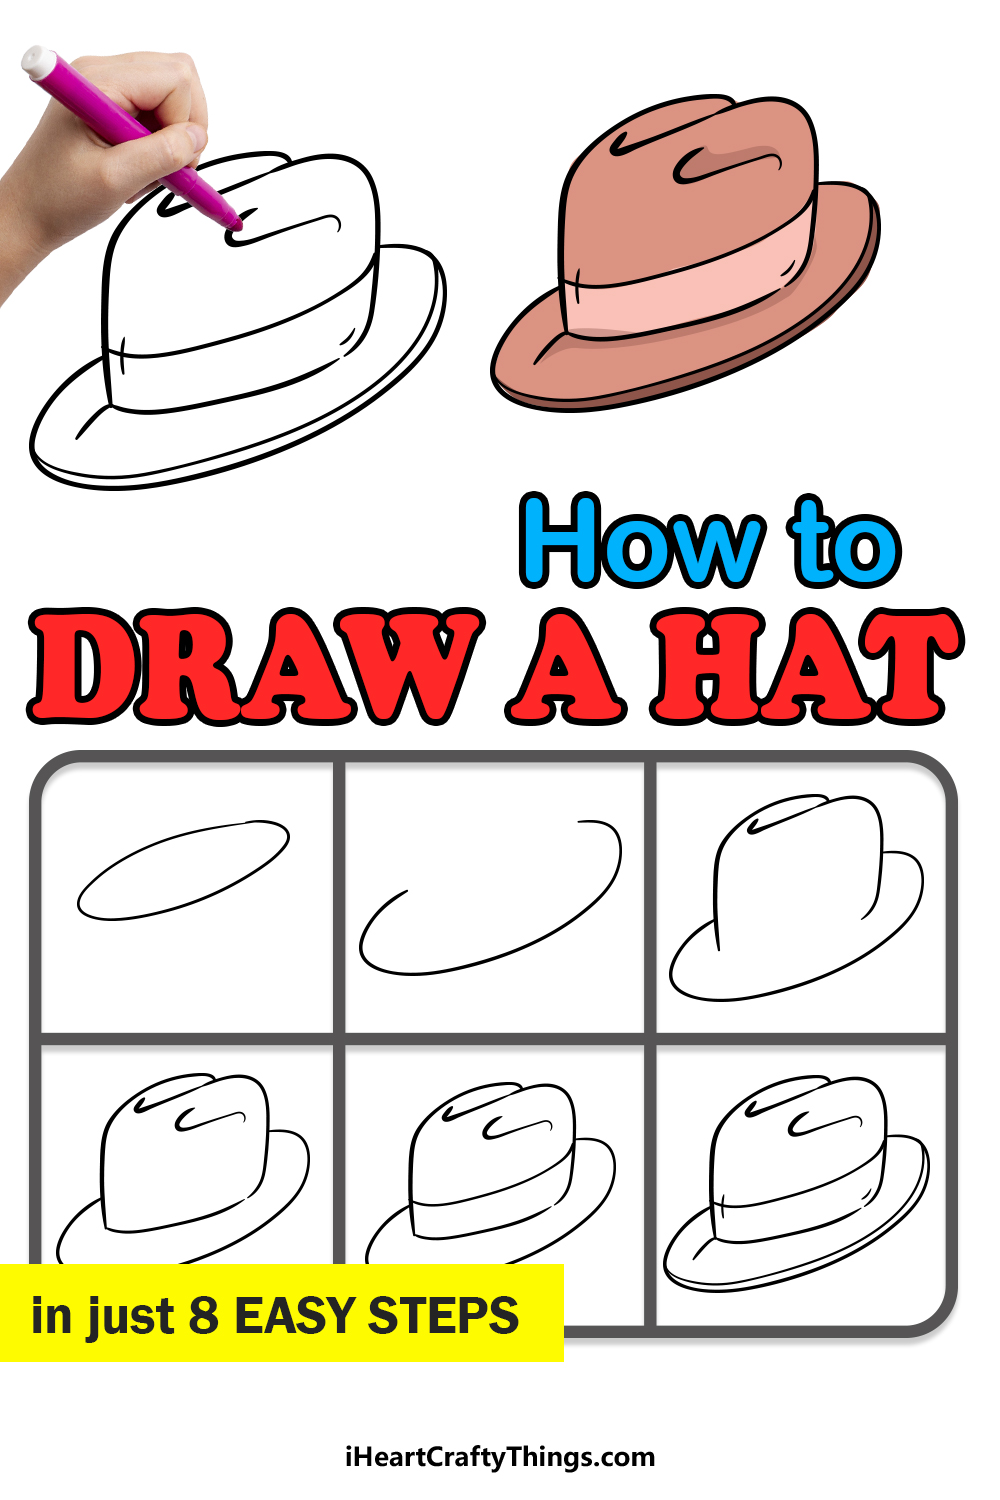 how to draw a hat in 8 easy steps